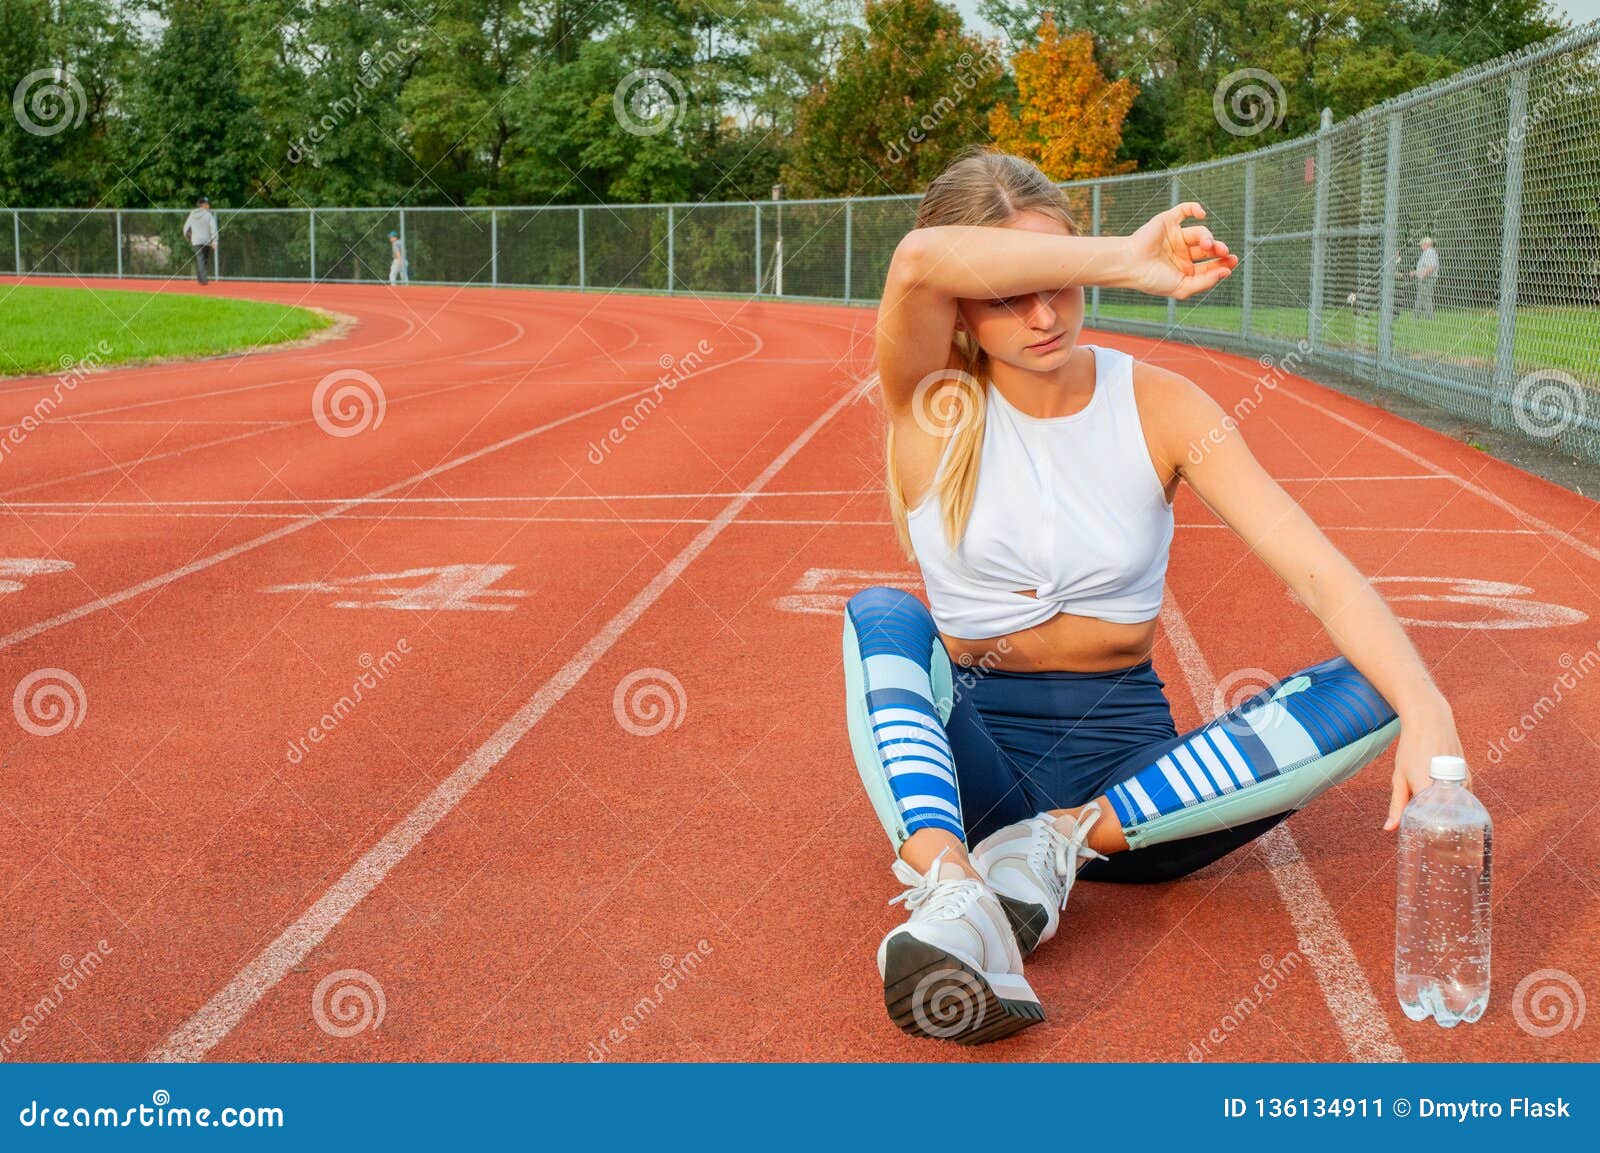 Tired Woman Runner Taking A Rest After Run Sitting On The ...